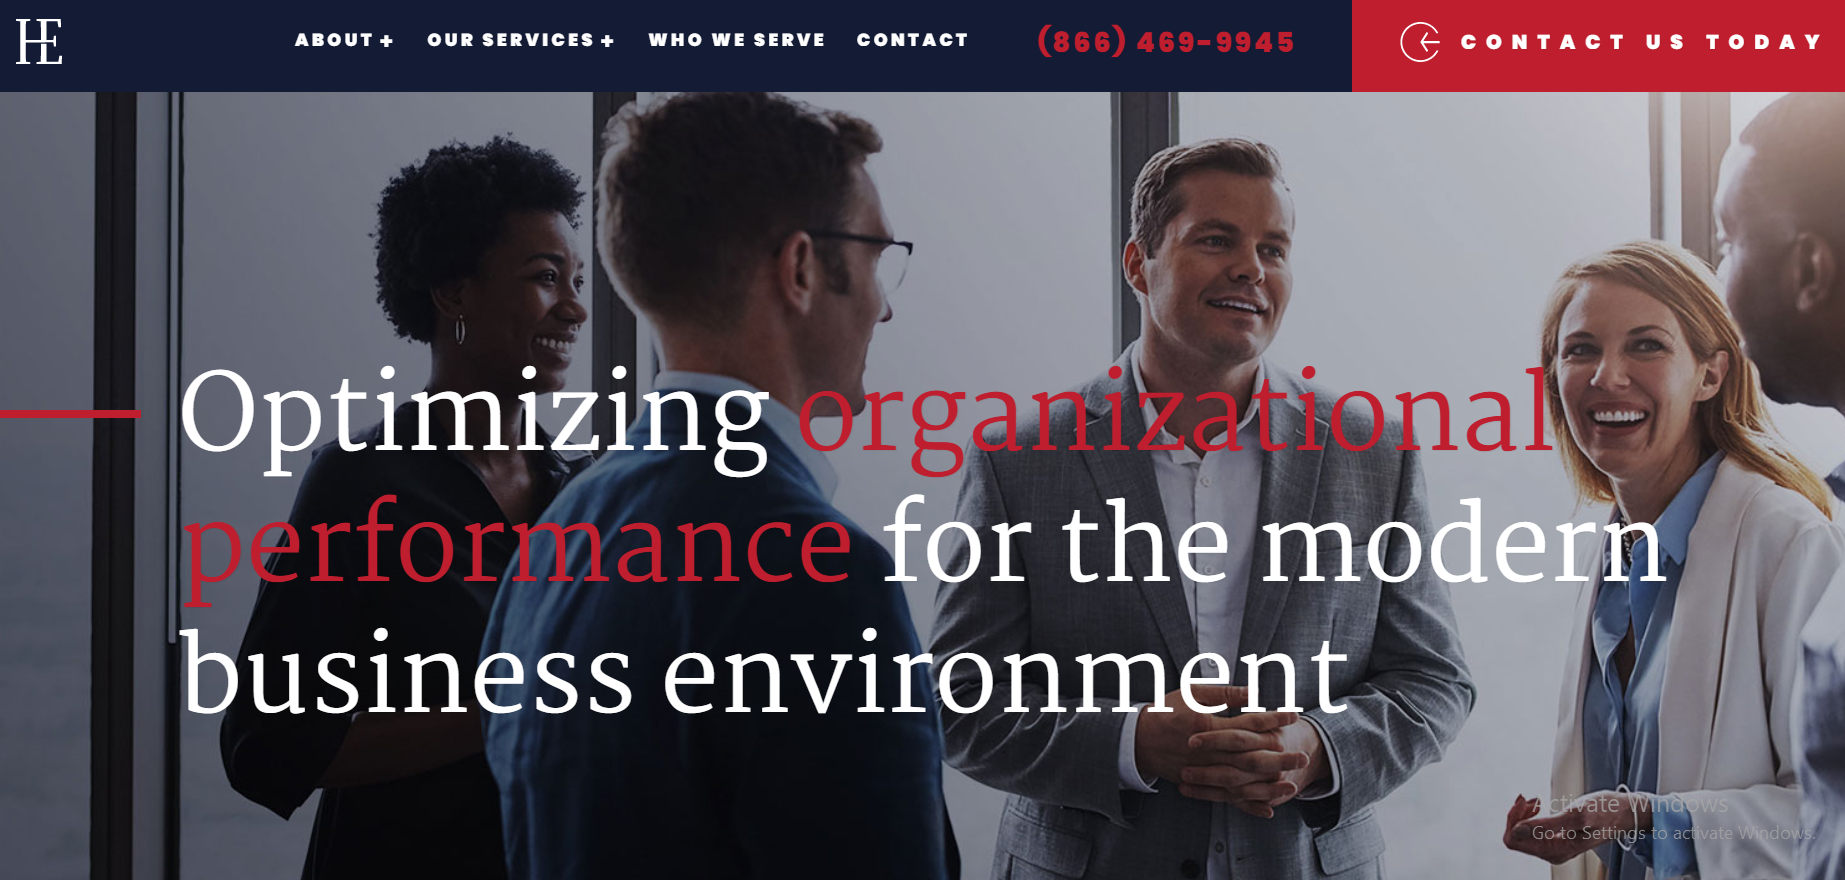 New Consulting Website Launched | A to Z